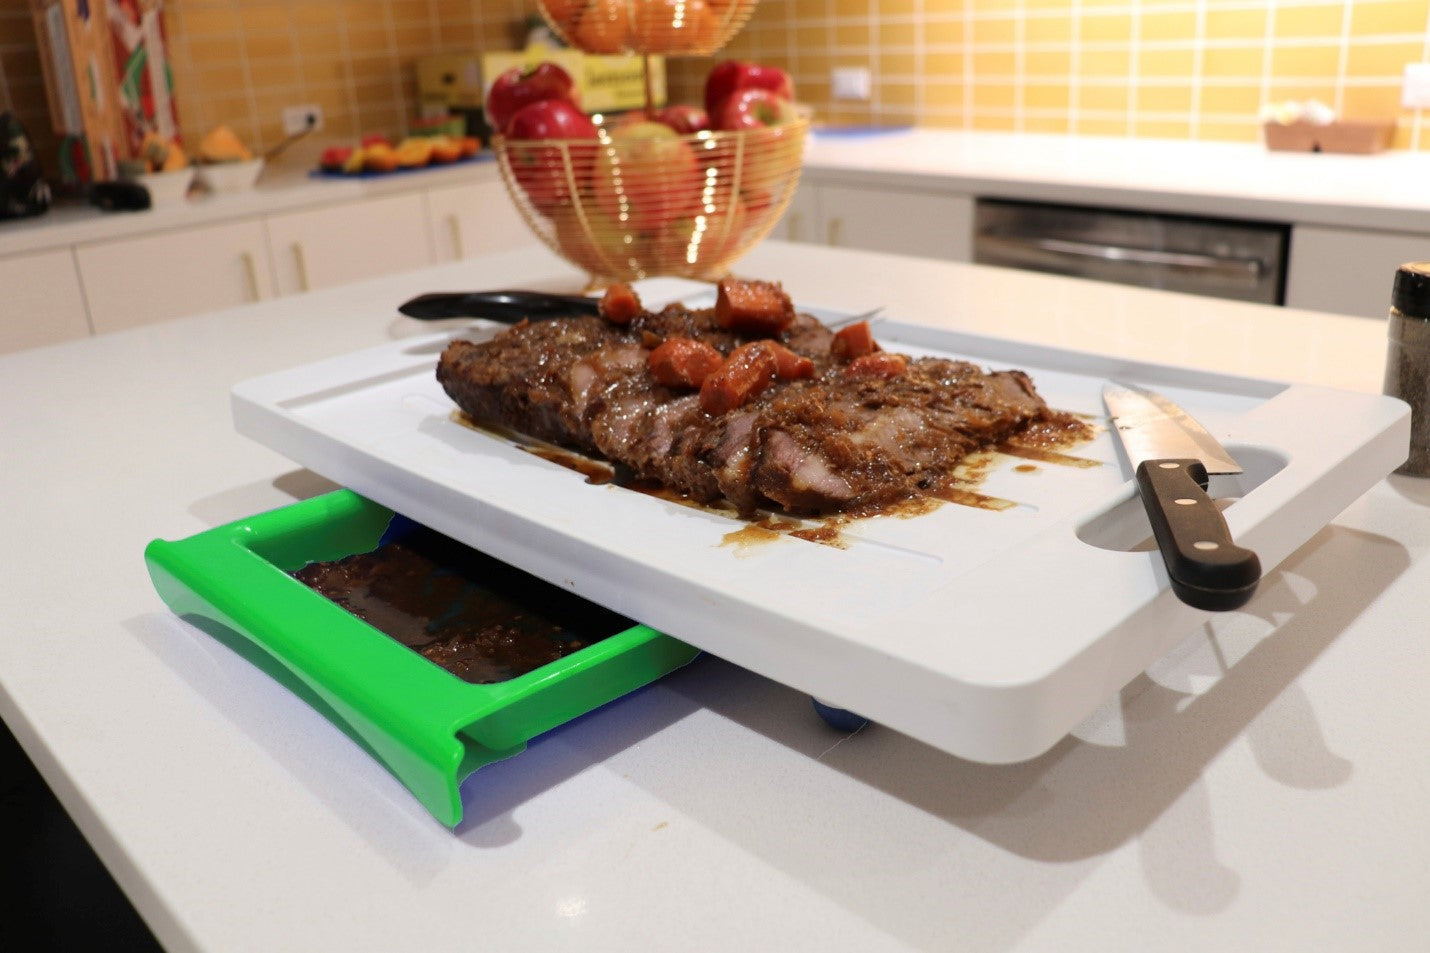 Dripless Cutting Board 2 in 1 System With Additional Cutting Board –  karvingking